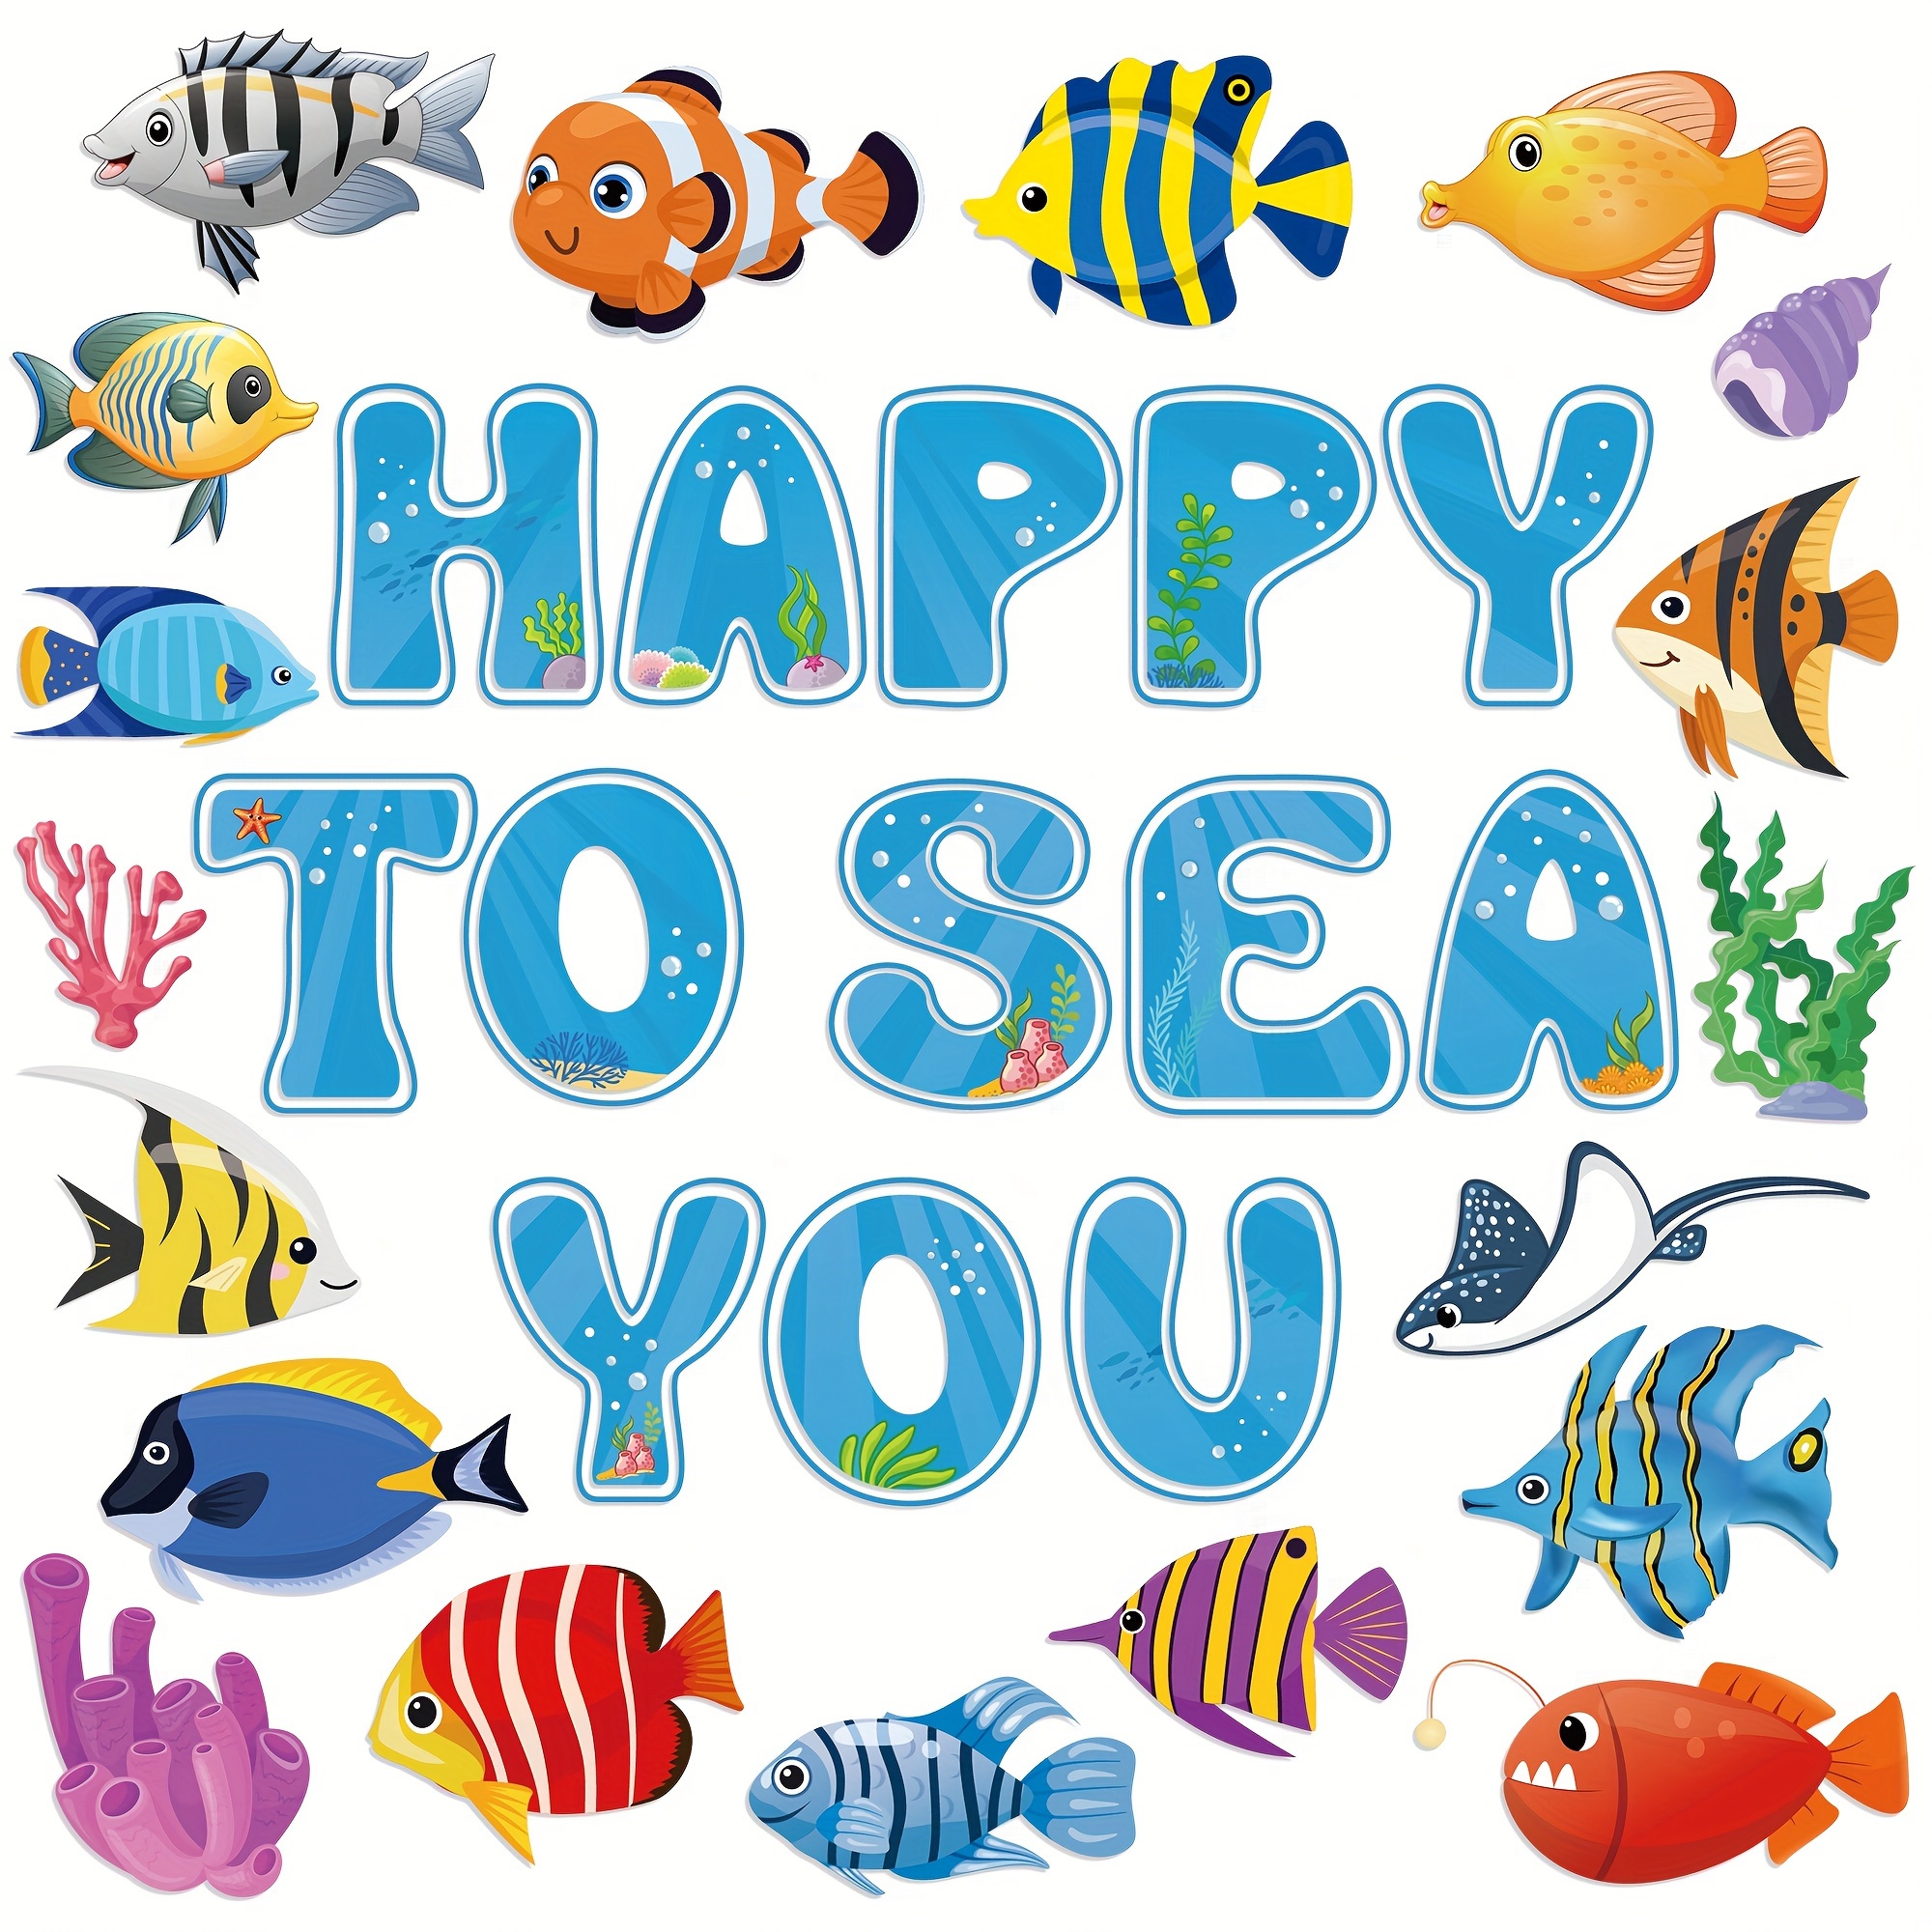 

Happy To Sea You Marine Animal Alphabet Posters Set - Perfect For Educational Activities, Themed Parties & More - Paper Material Daily Office Supplies Decor, 1 Set